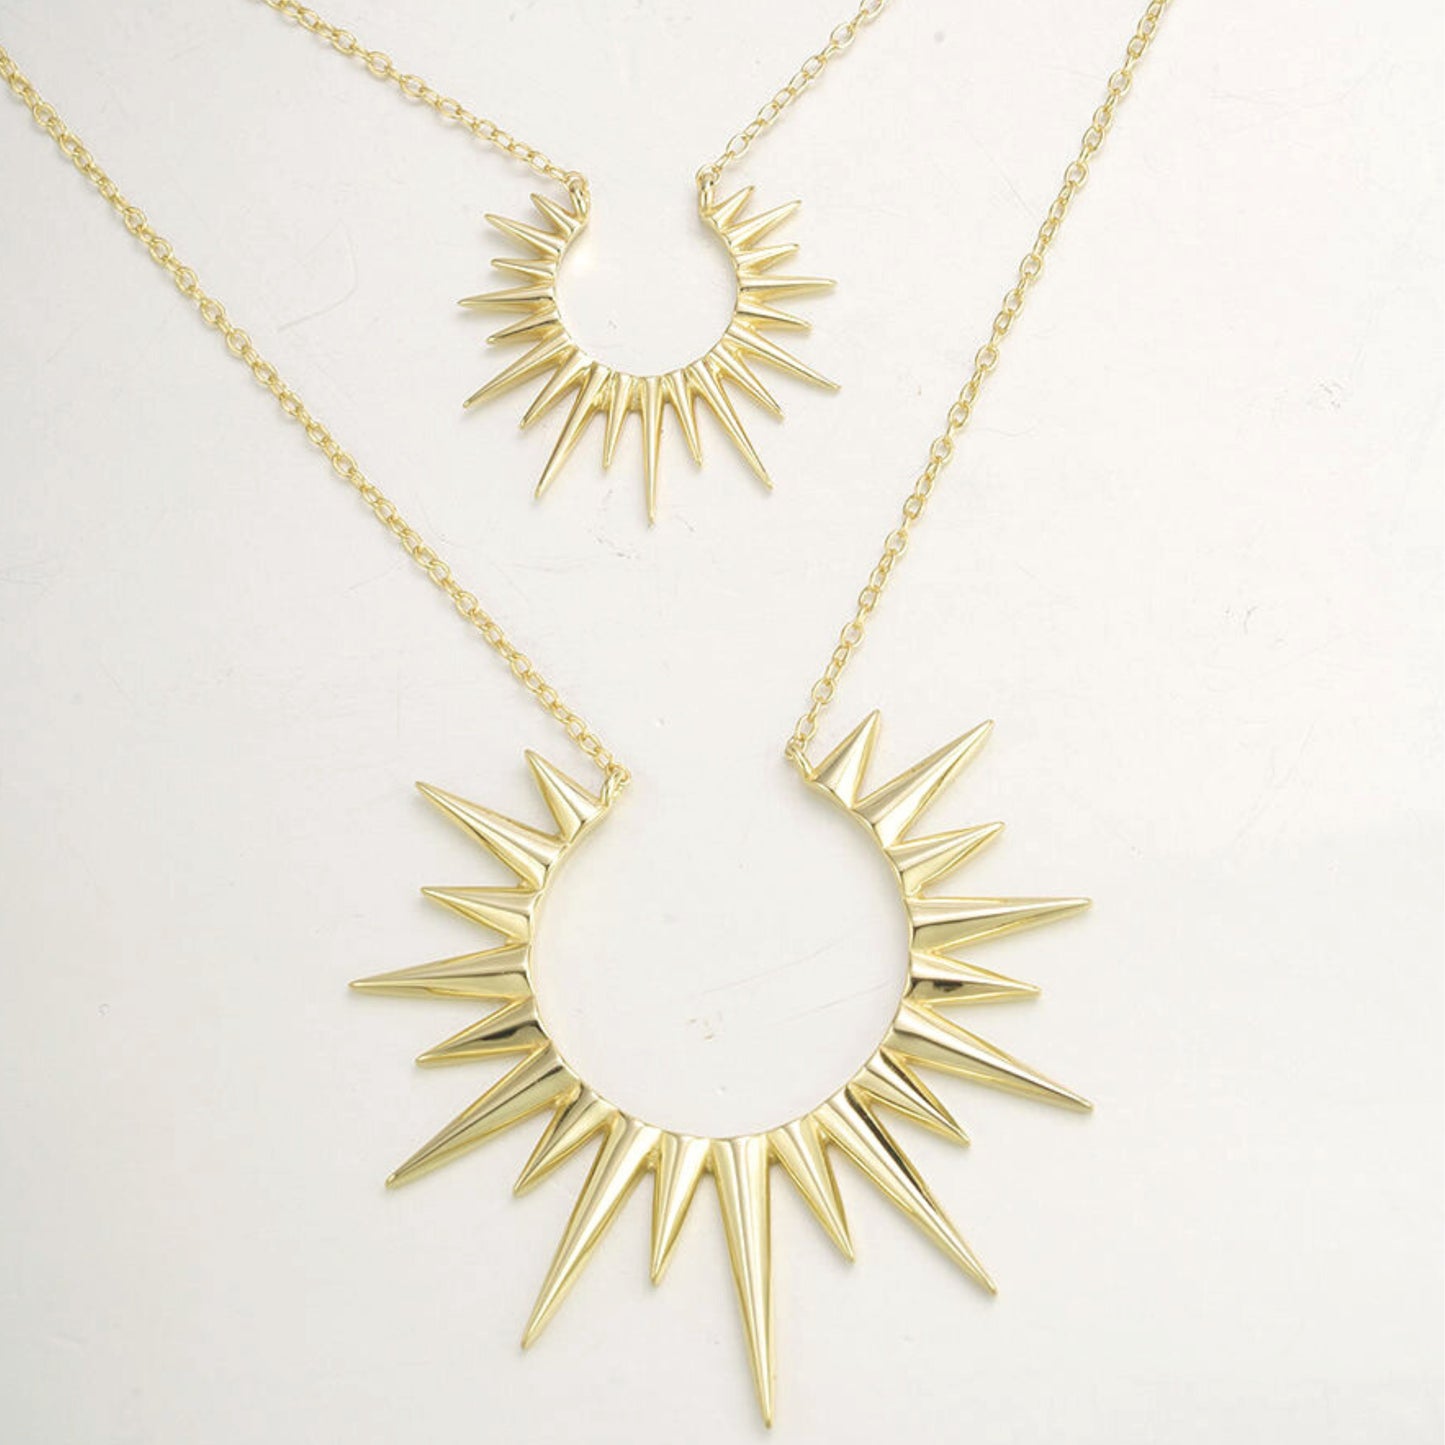 a pair of gold necklaces with spikes on them